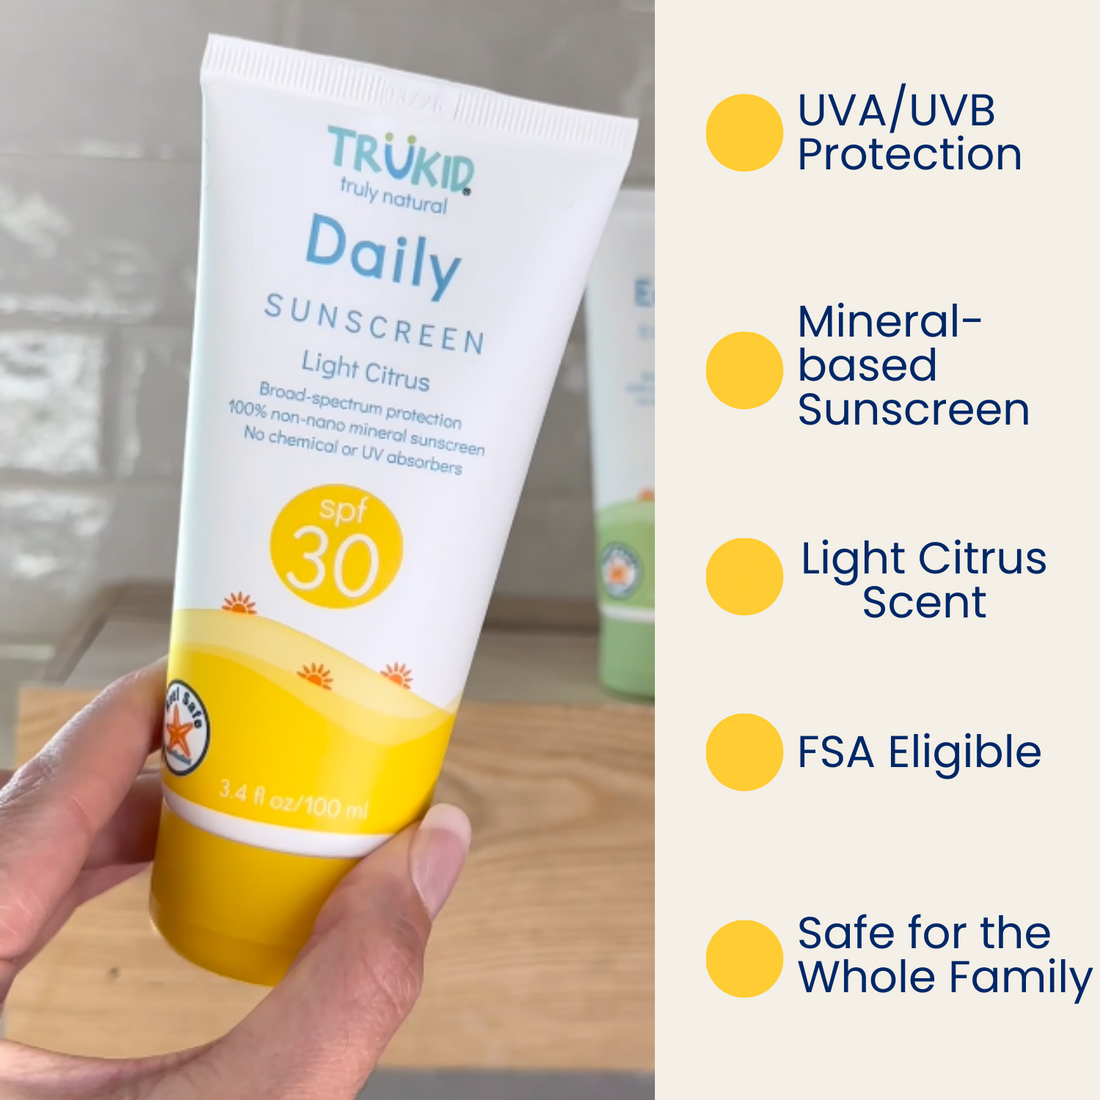 TruKid Daily SPF30 Sunscreen Features